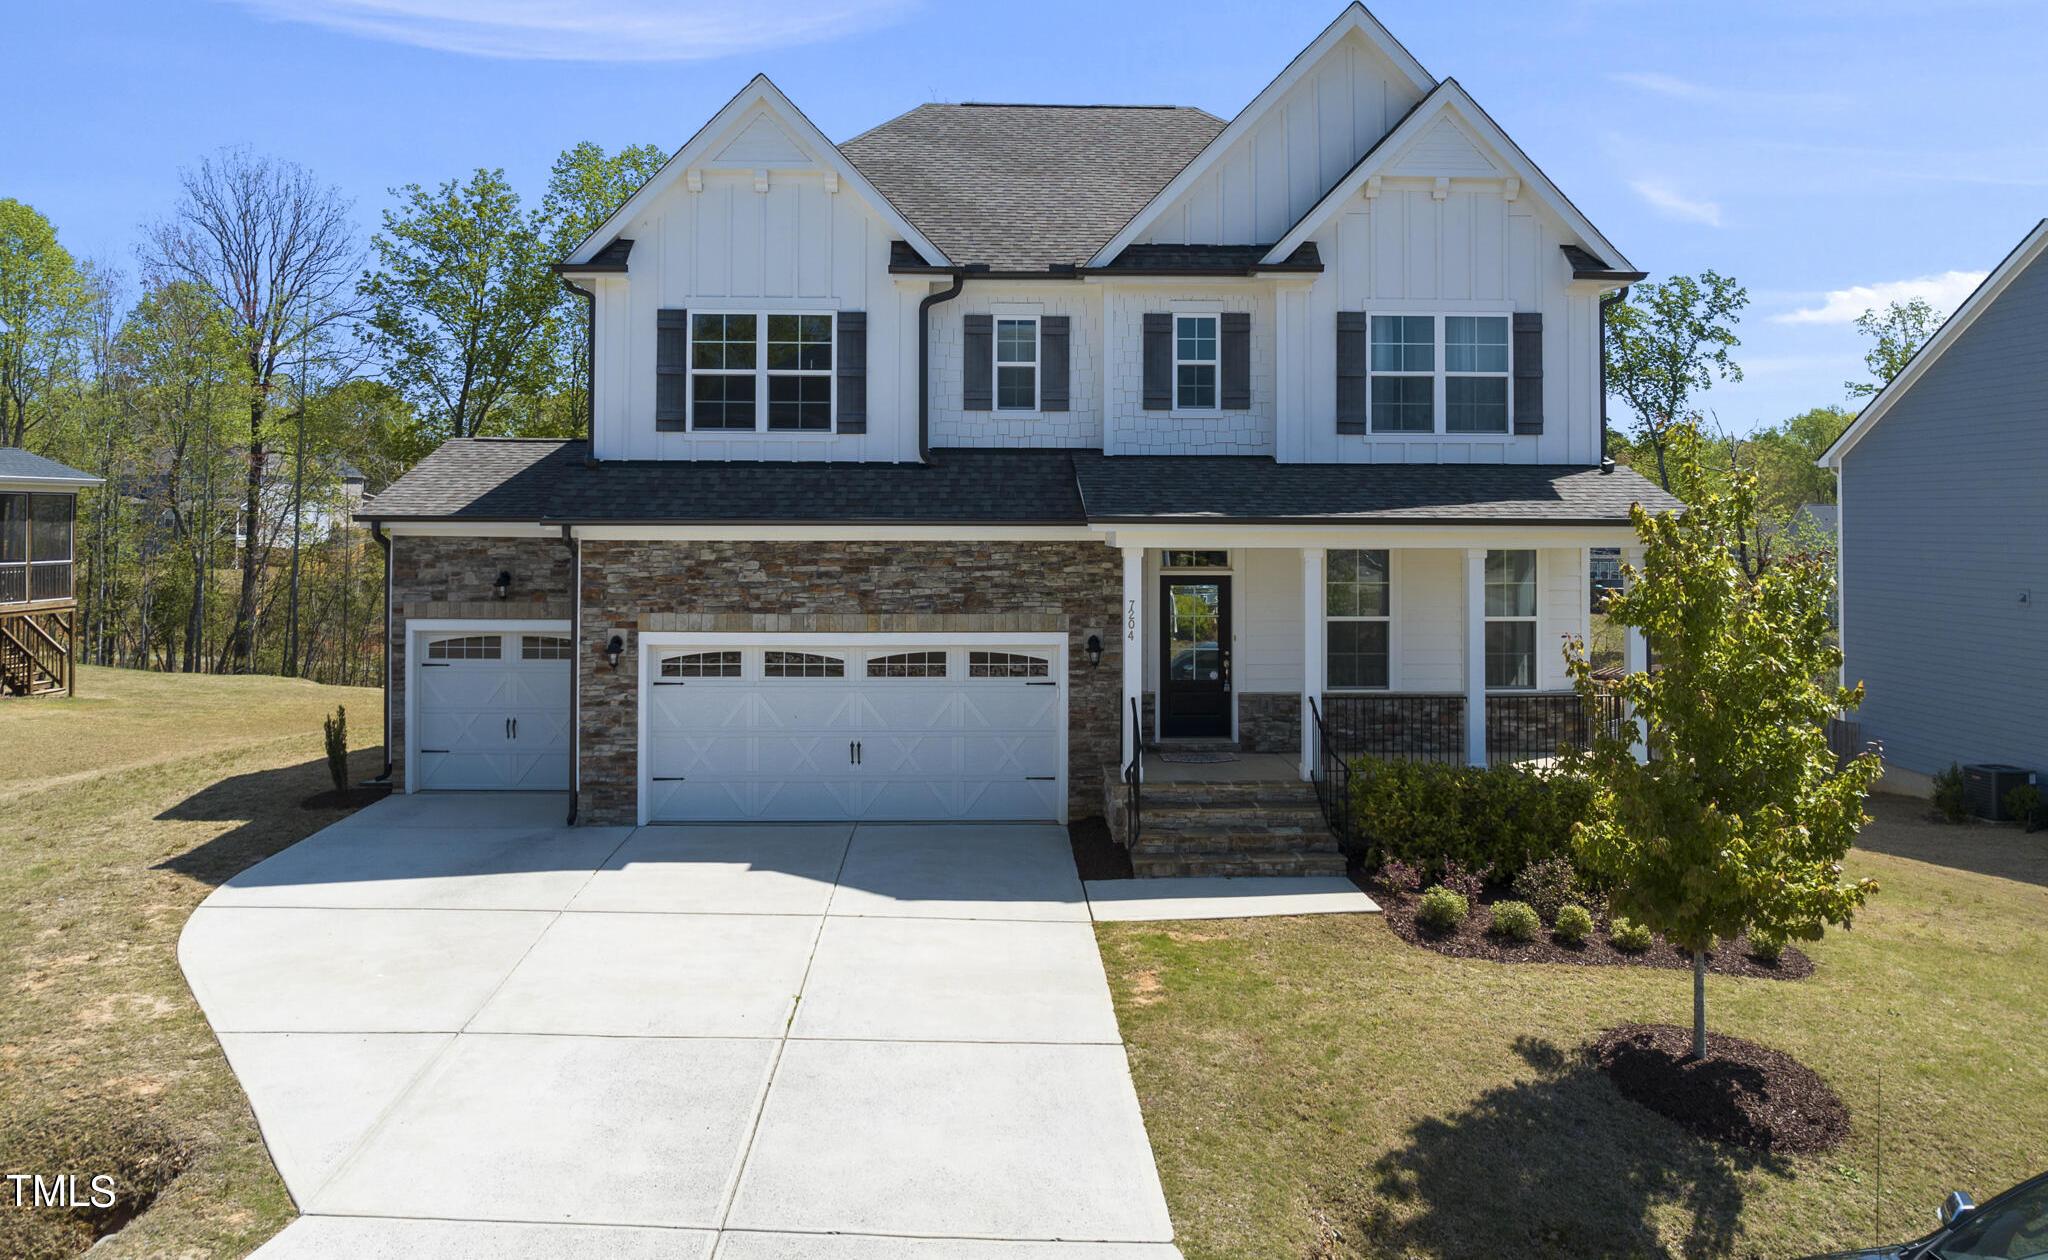 Photo one of 7204 Rex Rd Holly Springs NC 27540 | MLS 10021979